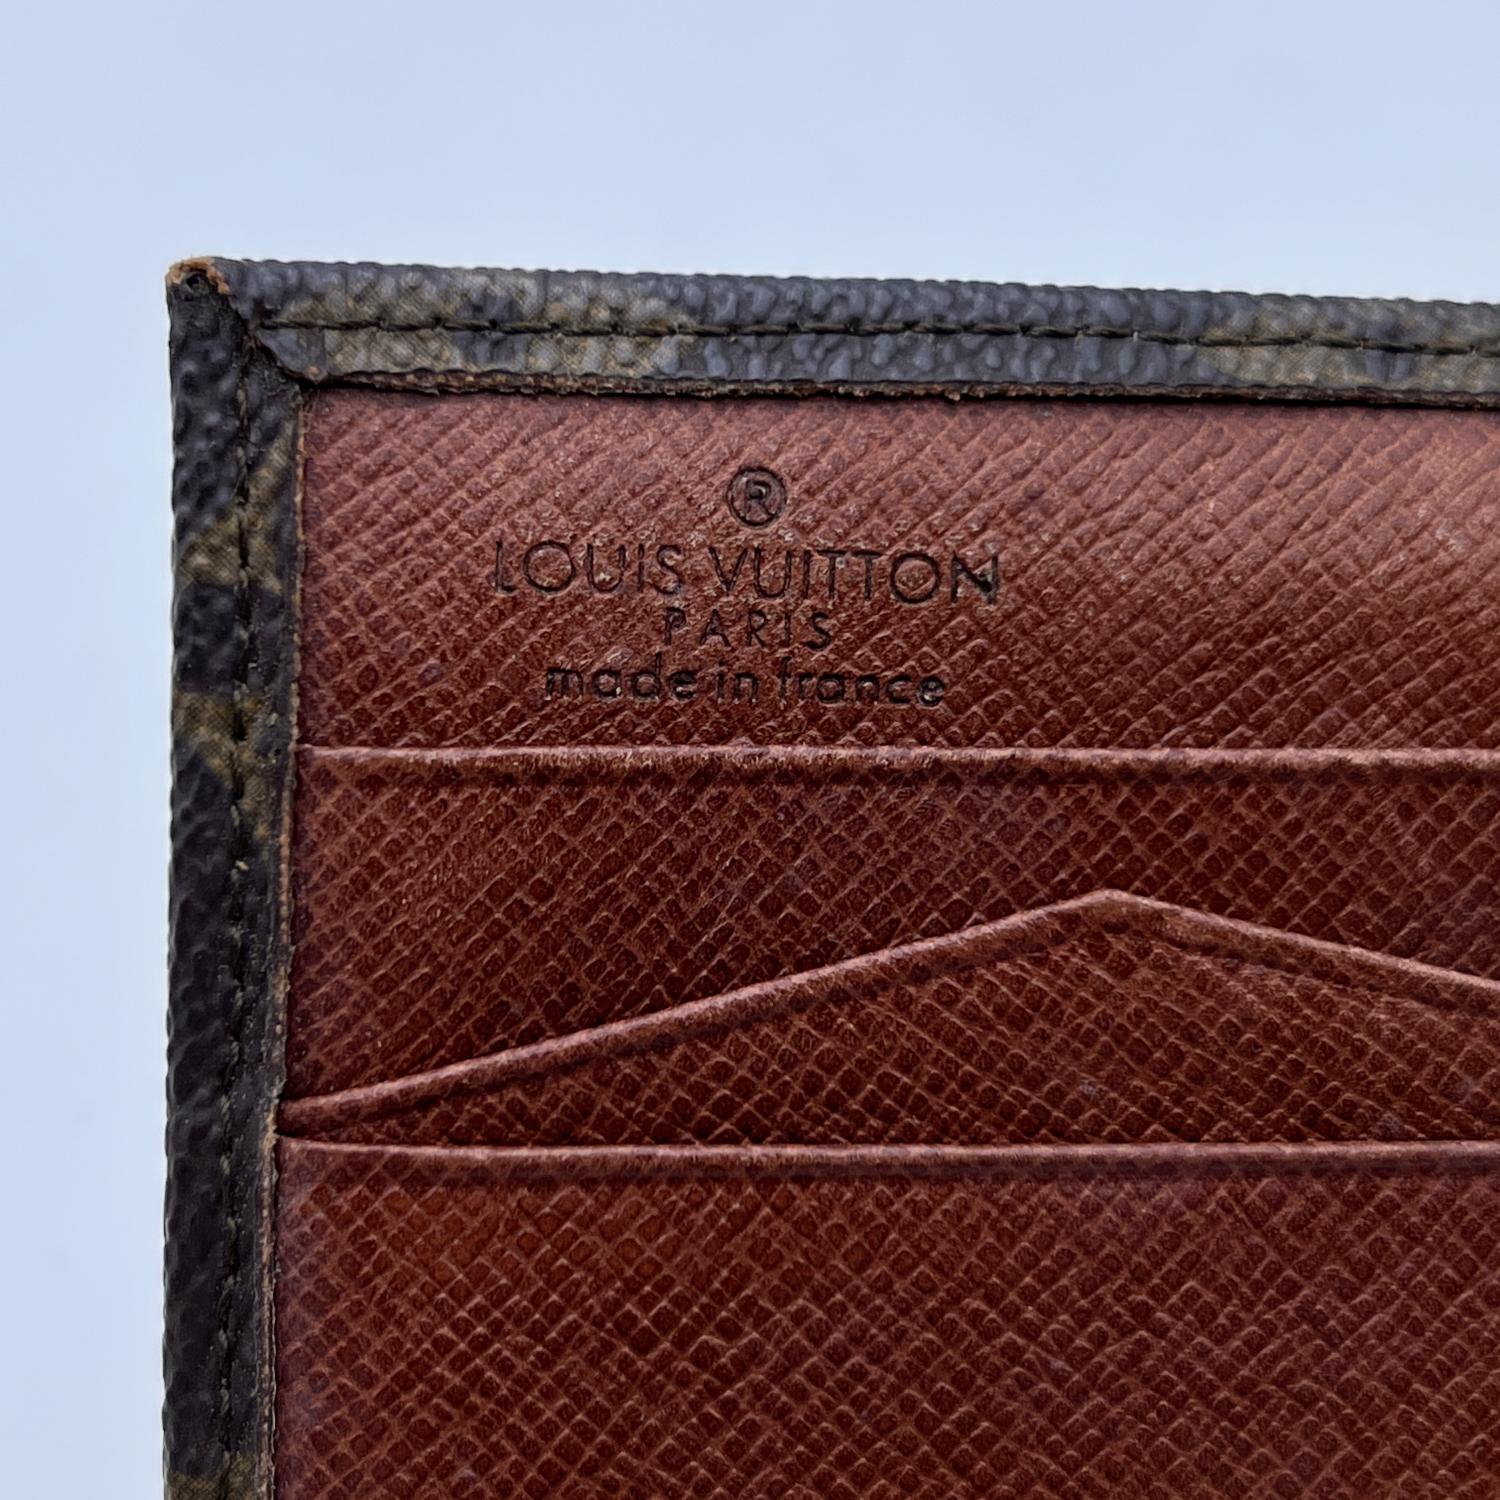 Louis Vuitton Vintage square-shaped wallet with double side flap. Crafted in brown monogram canvas. Tan leather lining. 1 flap coin compartment on a side and a trifold section on the other side, with 2 bill compartments. 'Louis Vuitton Paris - Made